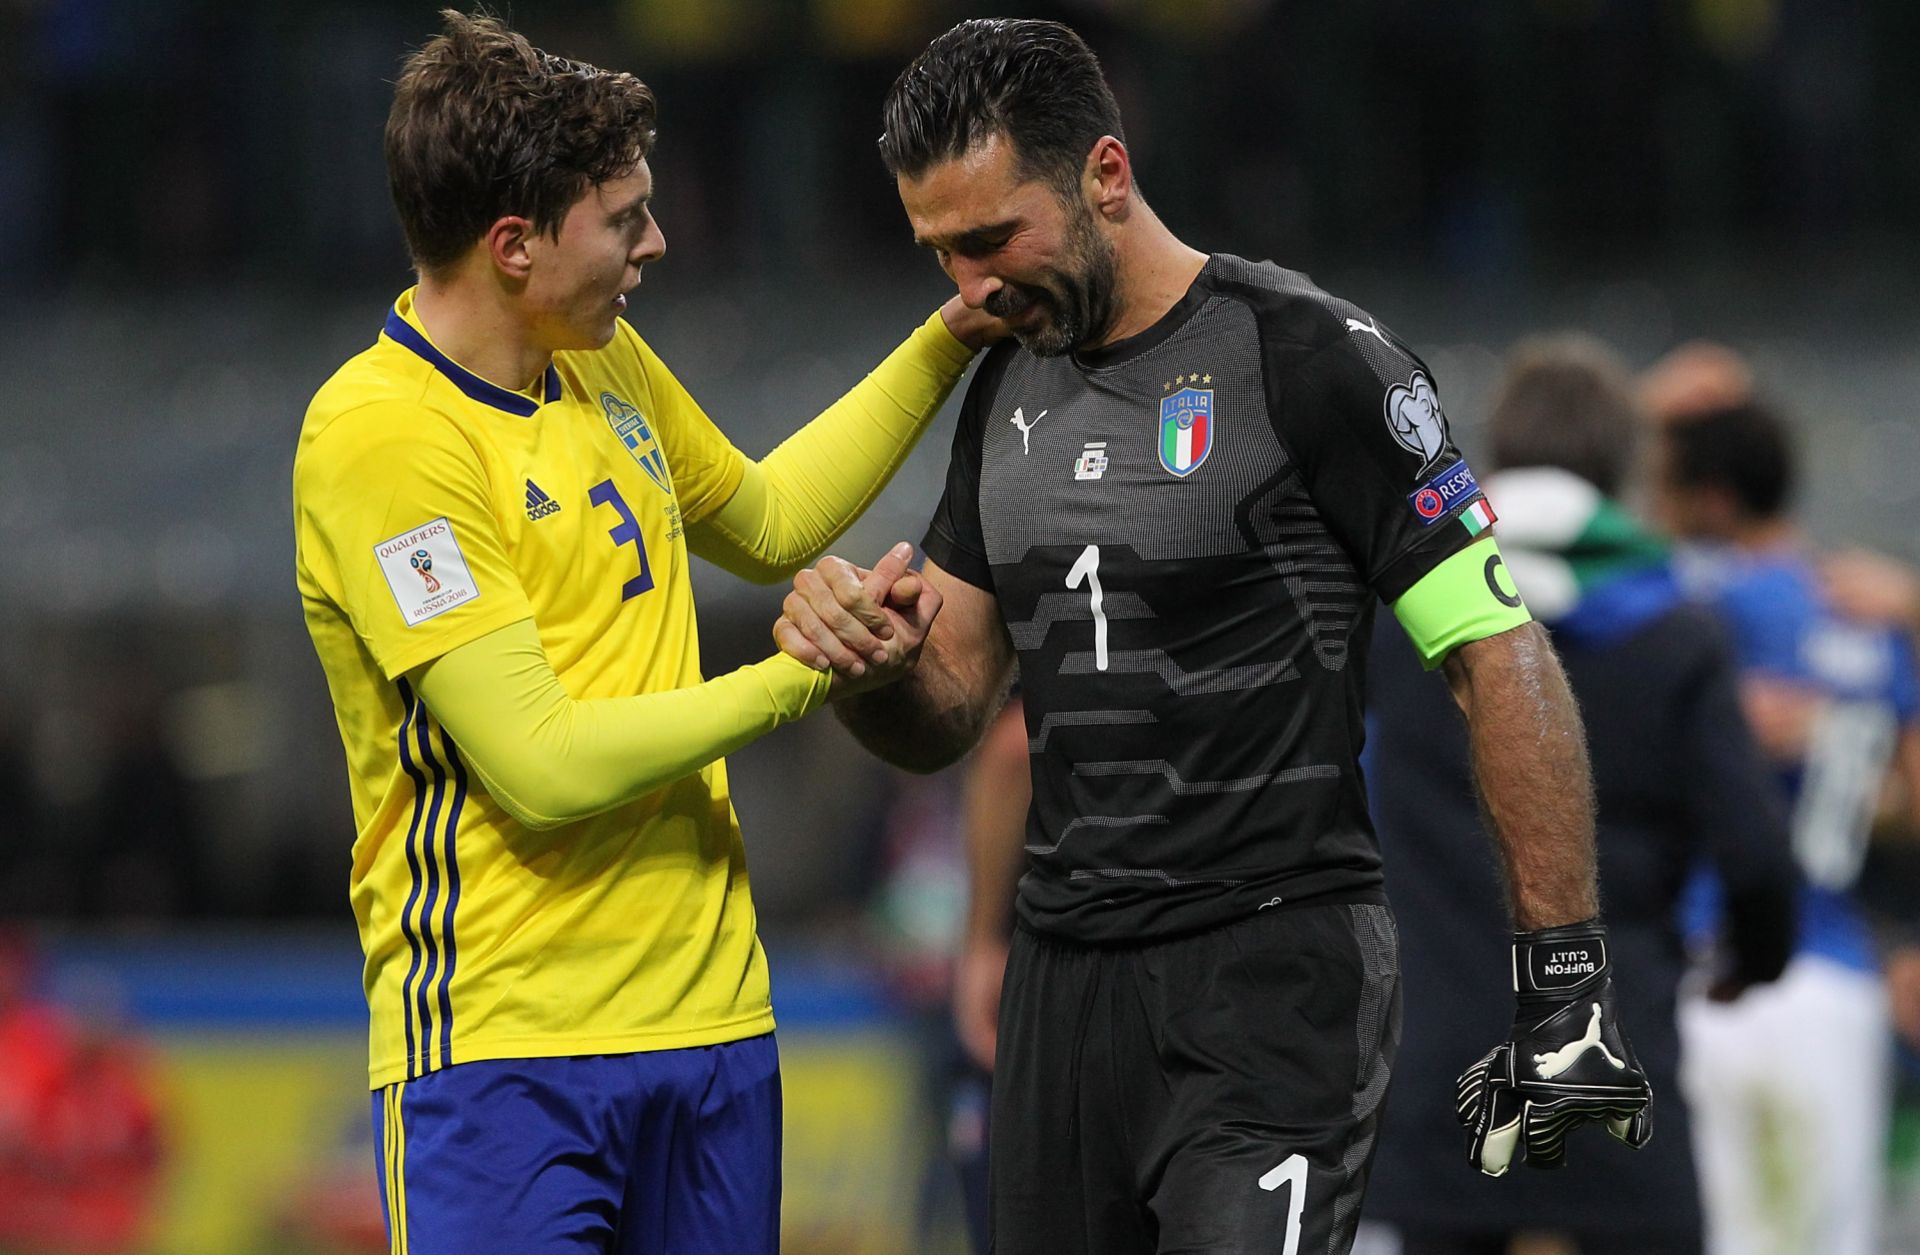 Italy’s failure to qualify for the World Cup tournament stunned the sporting world.